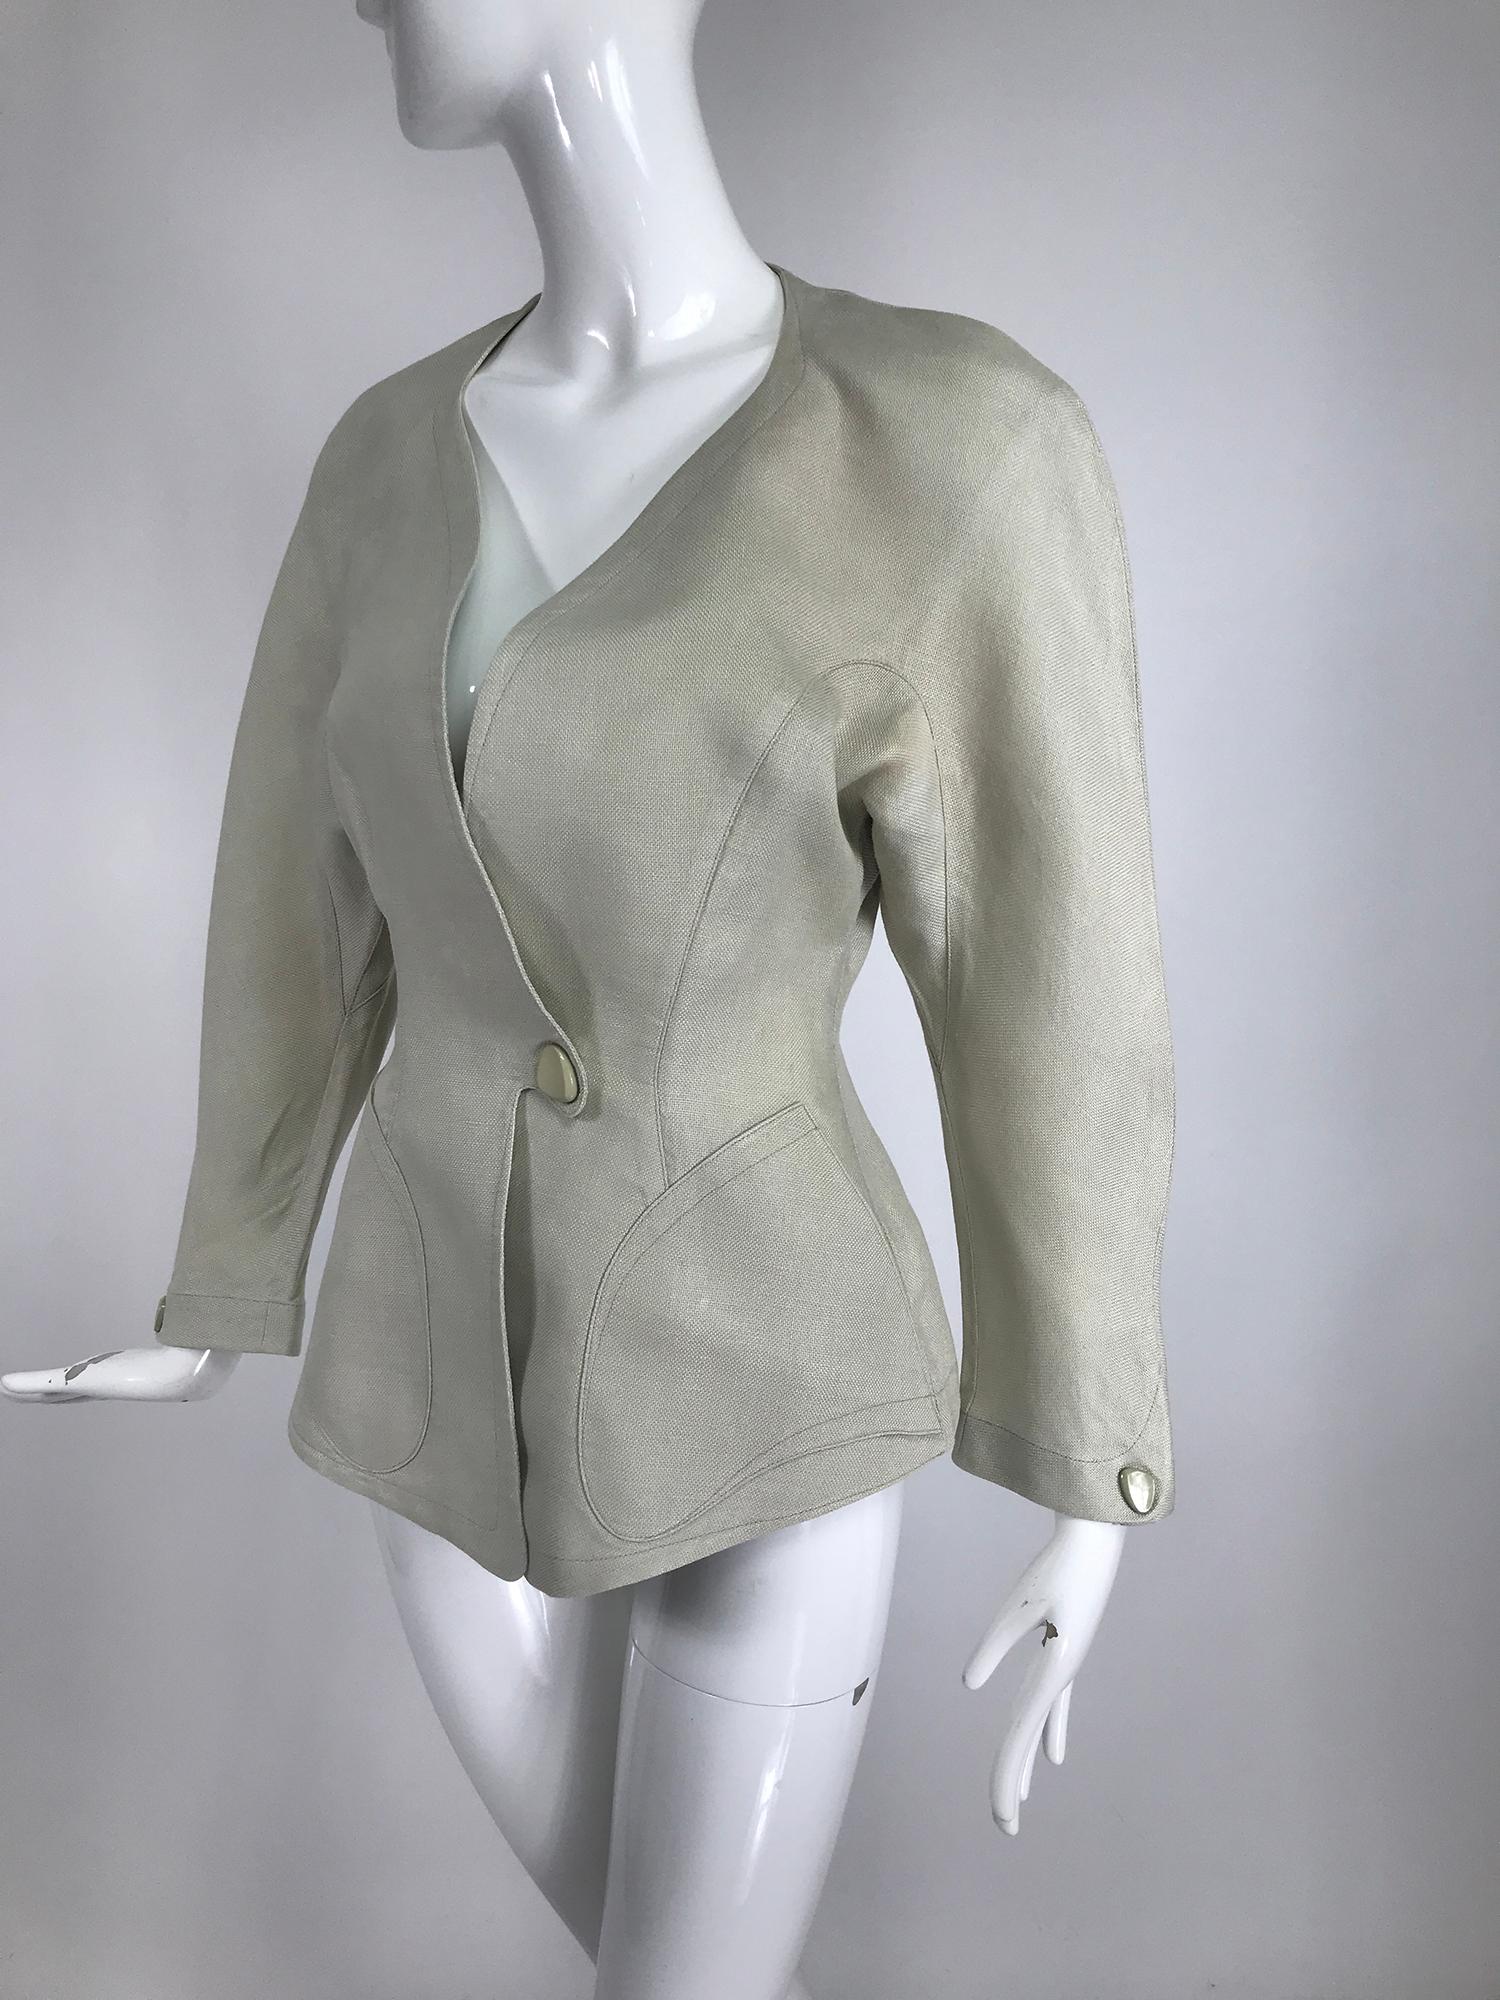 Thierry Mugler, Paris, early 1990s fitted linen jacket. Natural linen jacket in Mugler's signature accented fitted shape. Unlined, hip length jacket has finished seams inside. Oversized curved shoulder jacket has a fitted waist with a single shaped